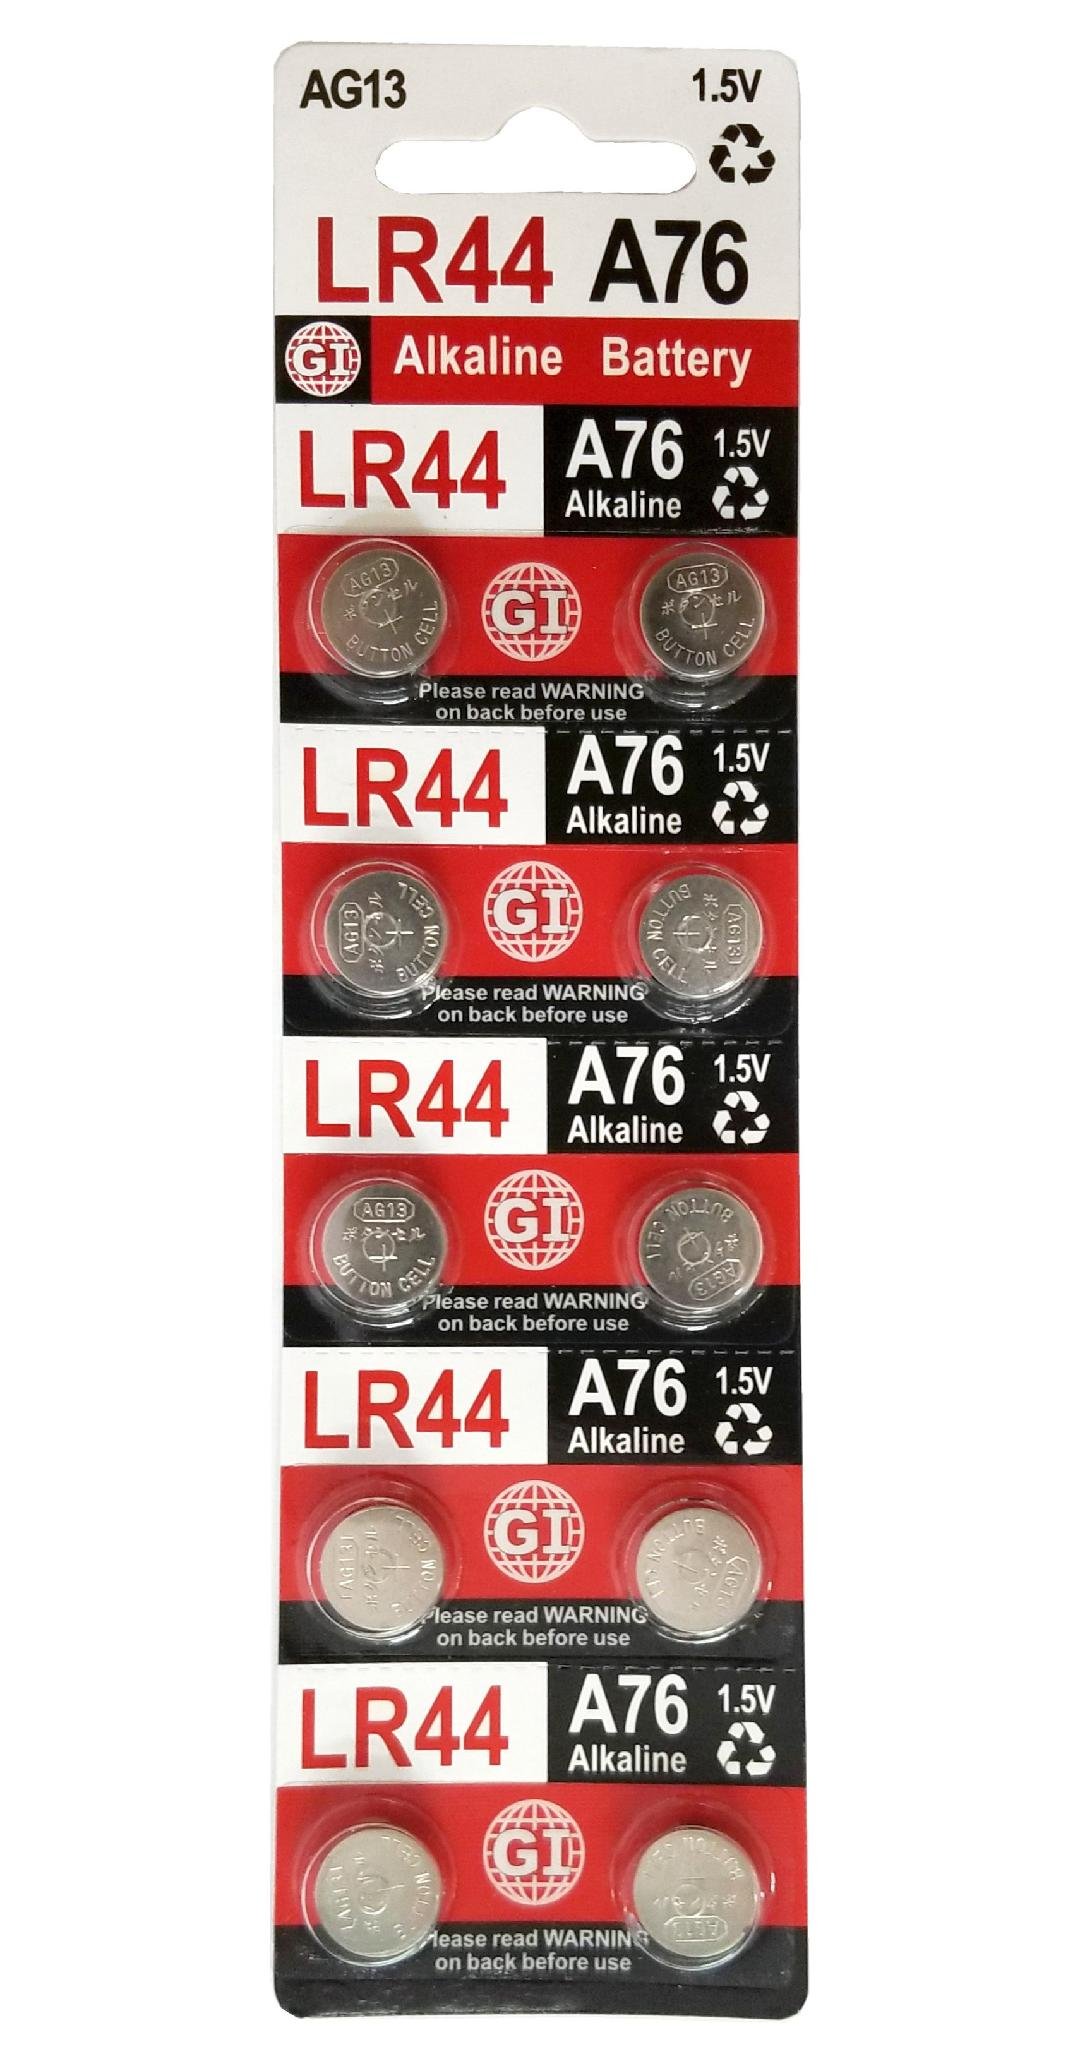 GI LR44 A76 AG13 1.5 Volt Alkaline Button Cell Batteries for Watches Clocks Remotes Games Controllers Toys & Electronic Devices (10)